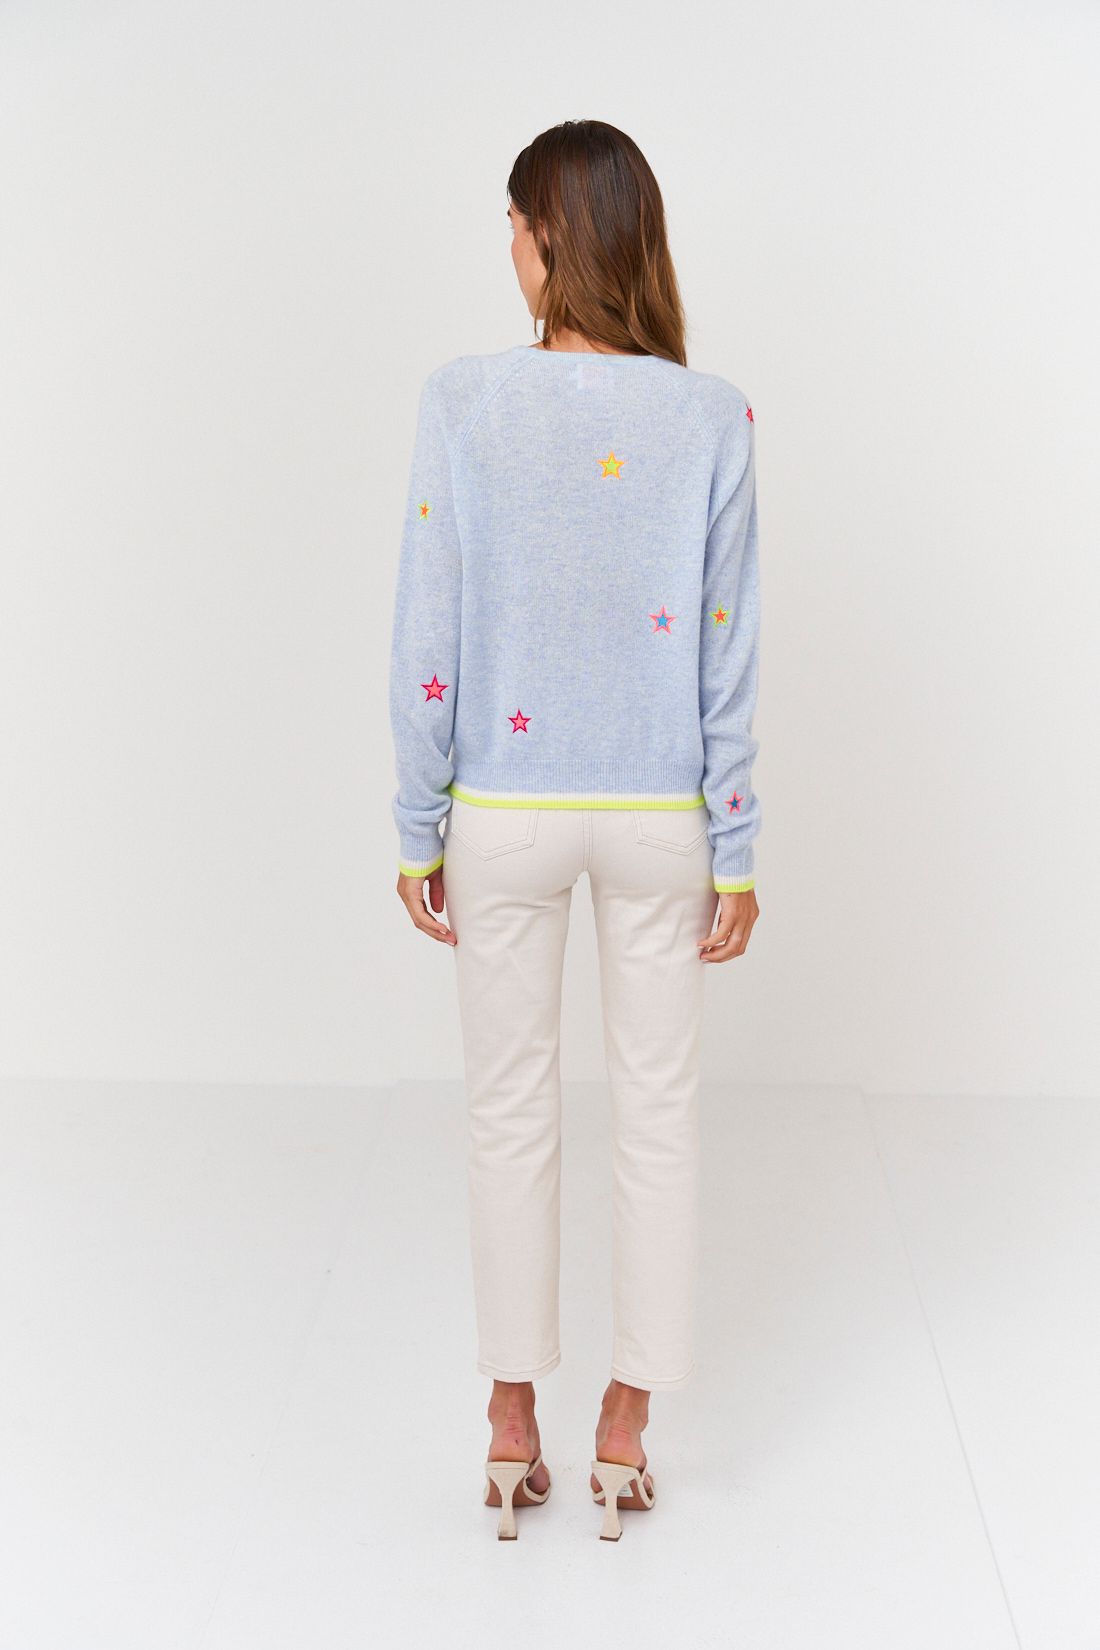 BRODIE CASHMERE STAR EMBROIDERED SWEATER